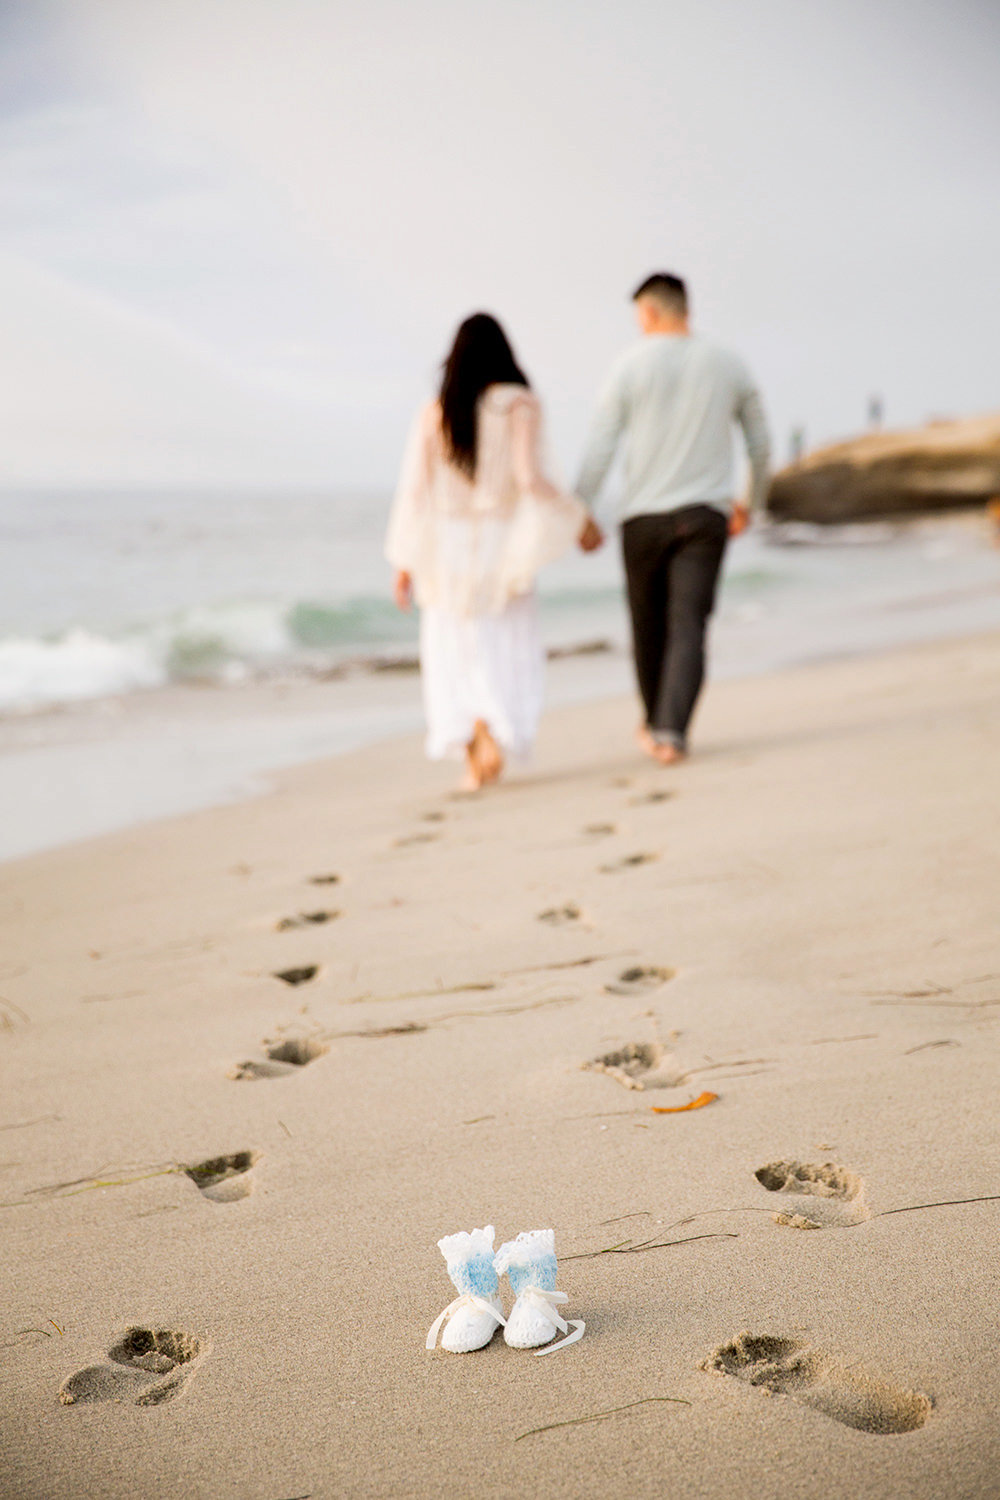 Fun Maternity photo with baby shoes at the beach in La Jolla.